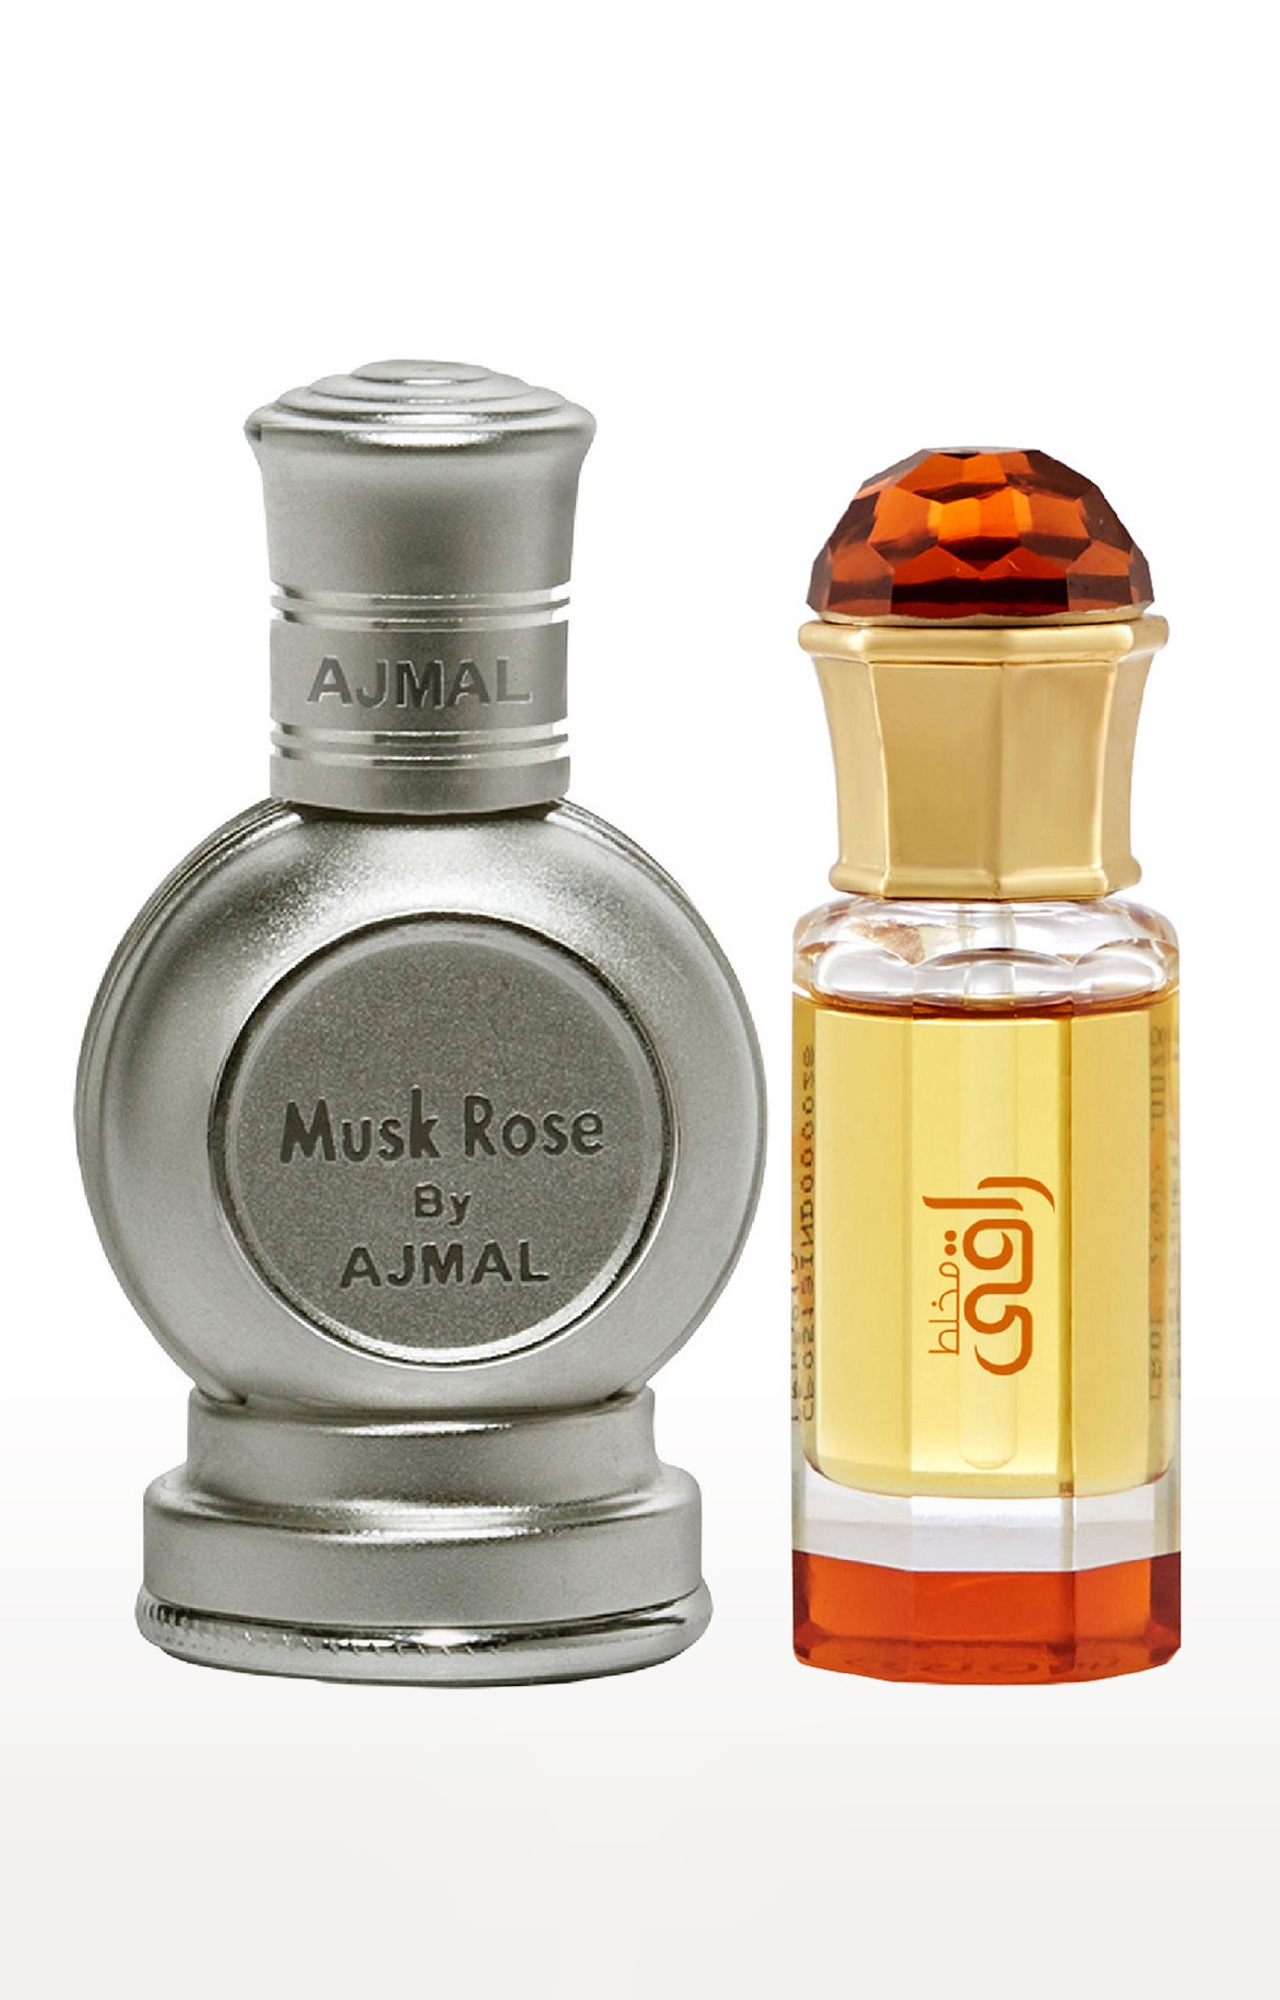 Ajmal Musk Rose Concentrated Perfume Oil Musky Alcohol-free Attar 12ml for Unisex and Mukhallat Raaqi Concentrated Perfume Oil Alcohol-free Attar 10ml for Unisex